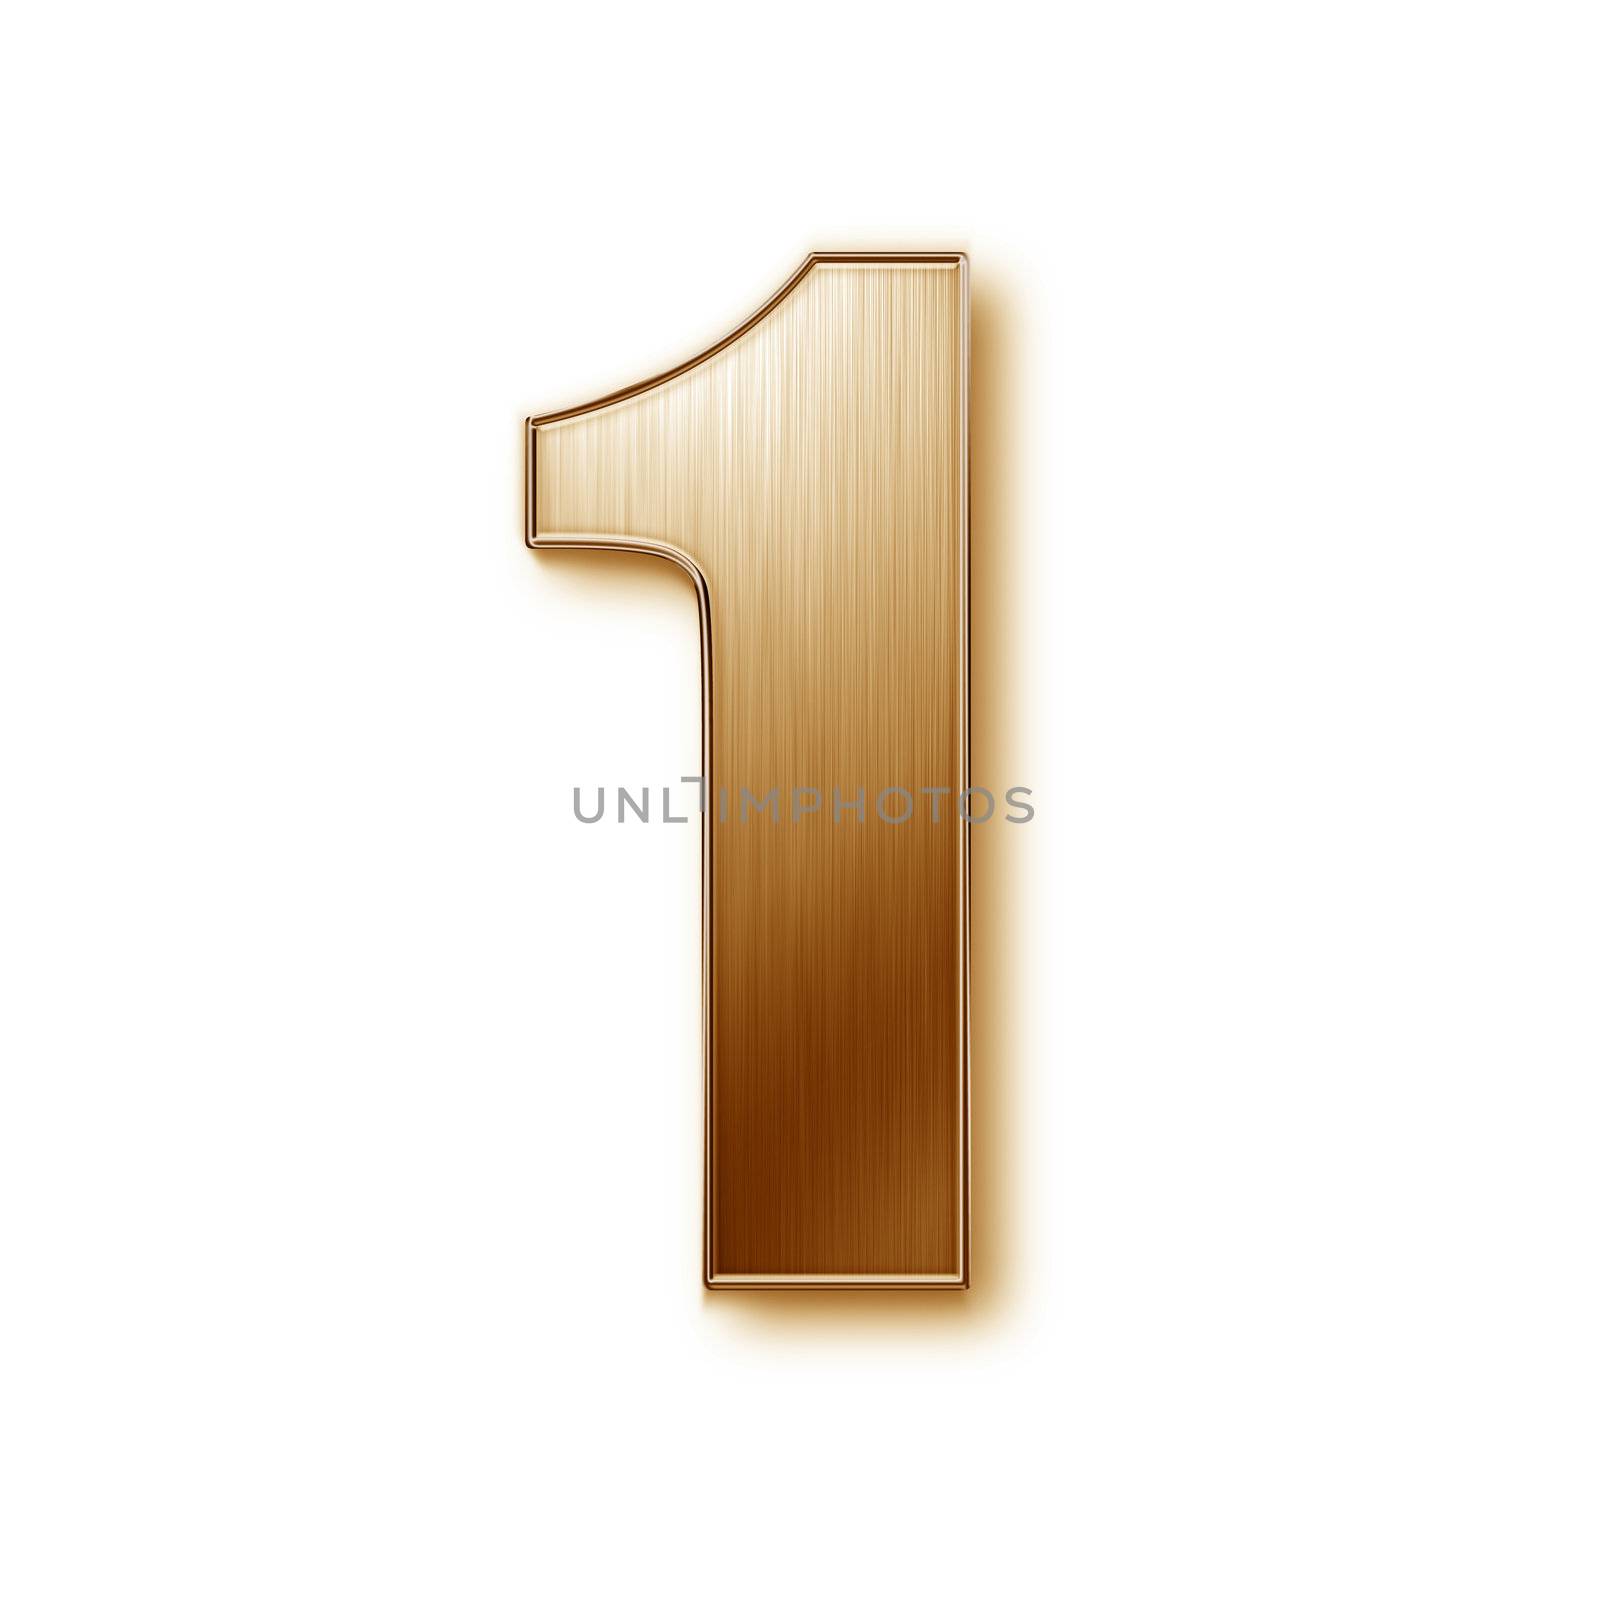 An image of a brished golden number one